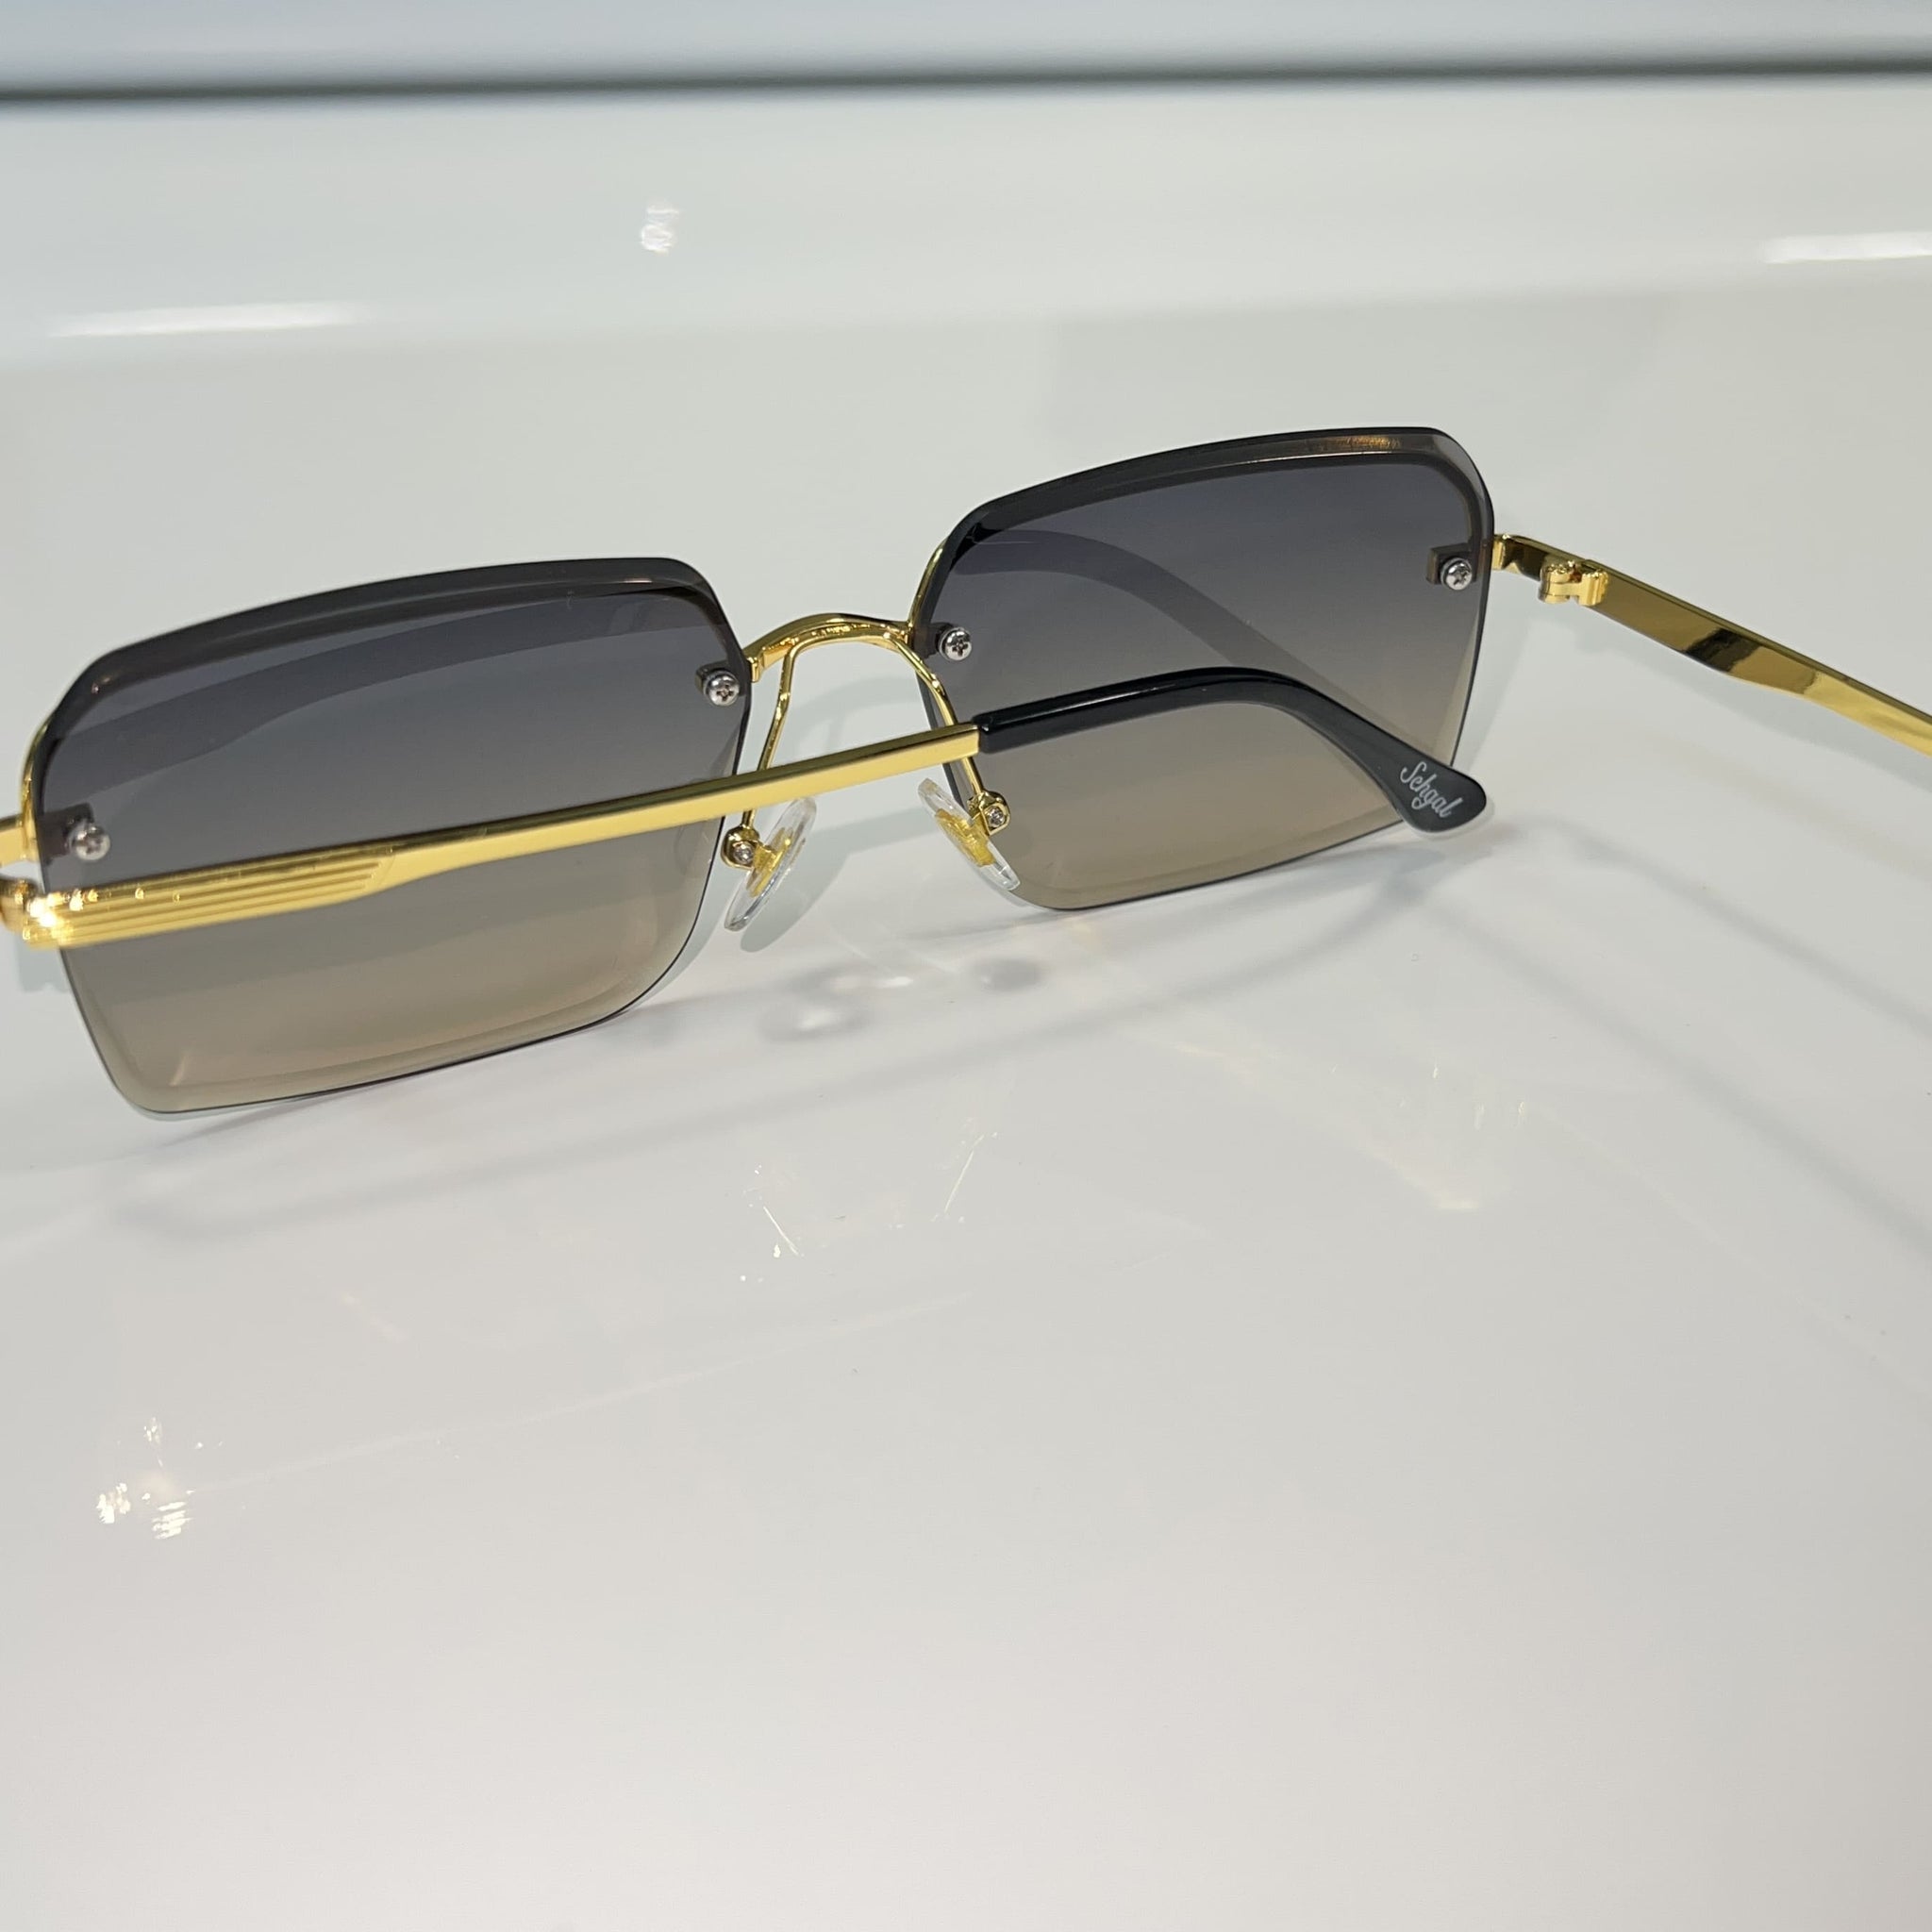 Invincible Glasses - 14k gold plated - Black / Grey Shade - Sehgal Glasses